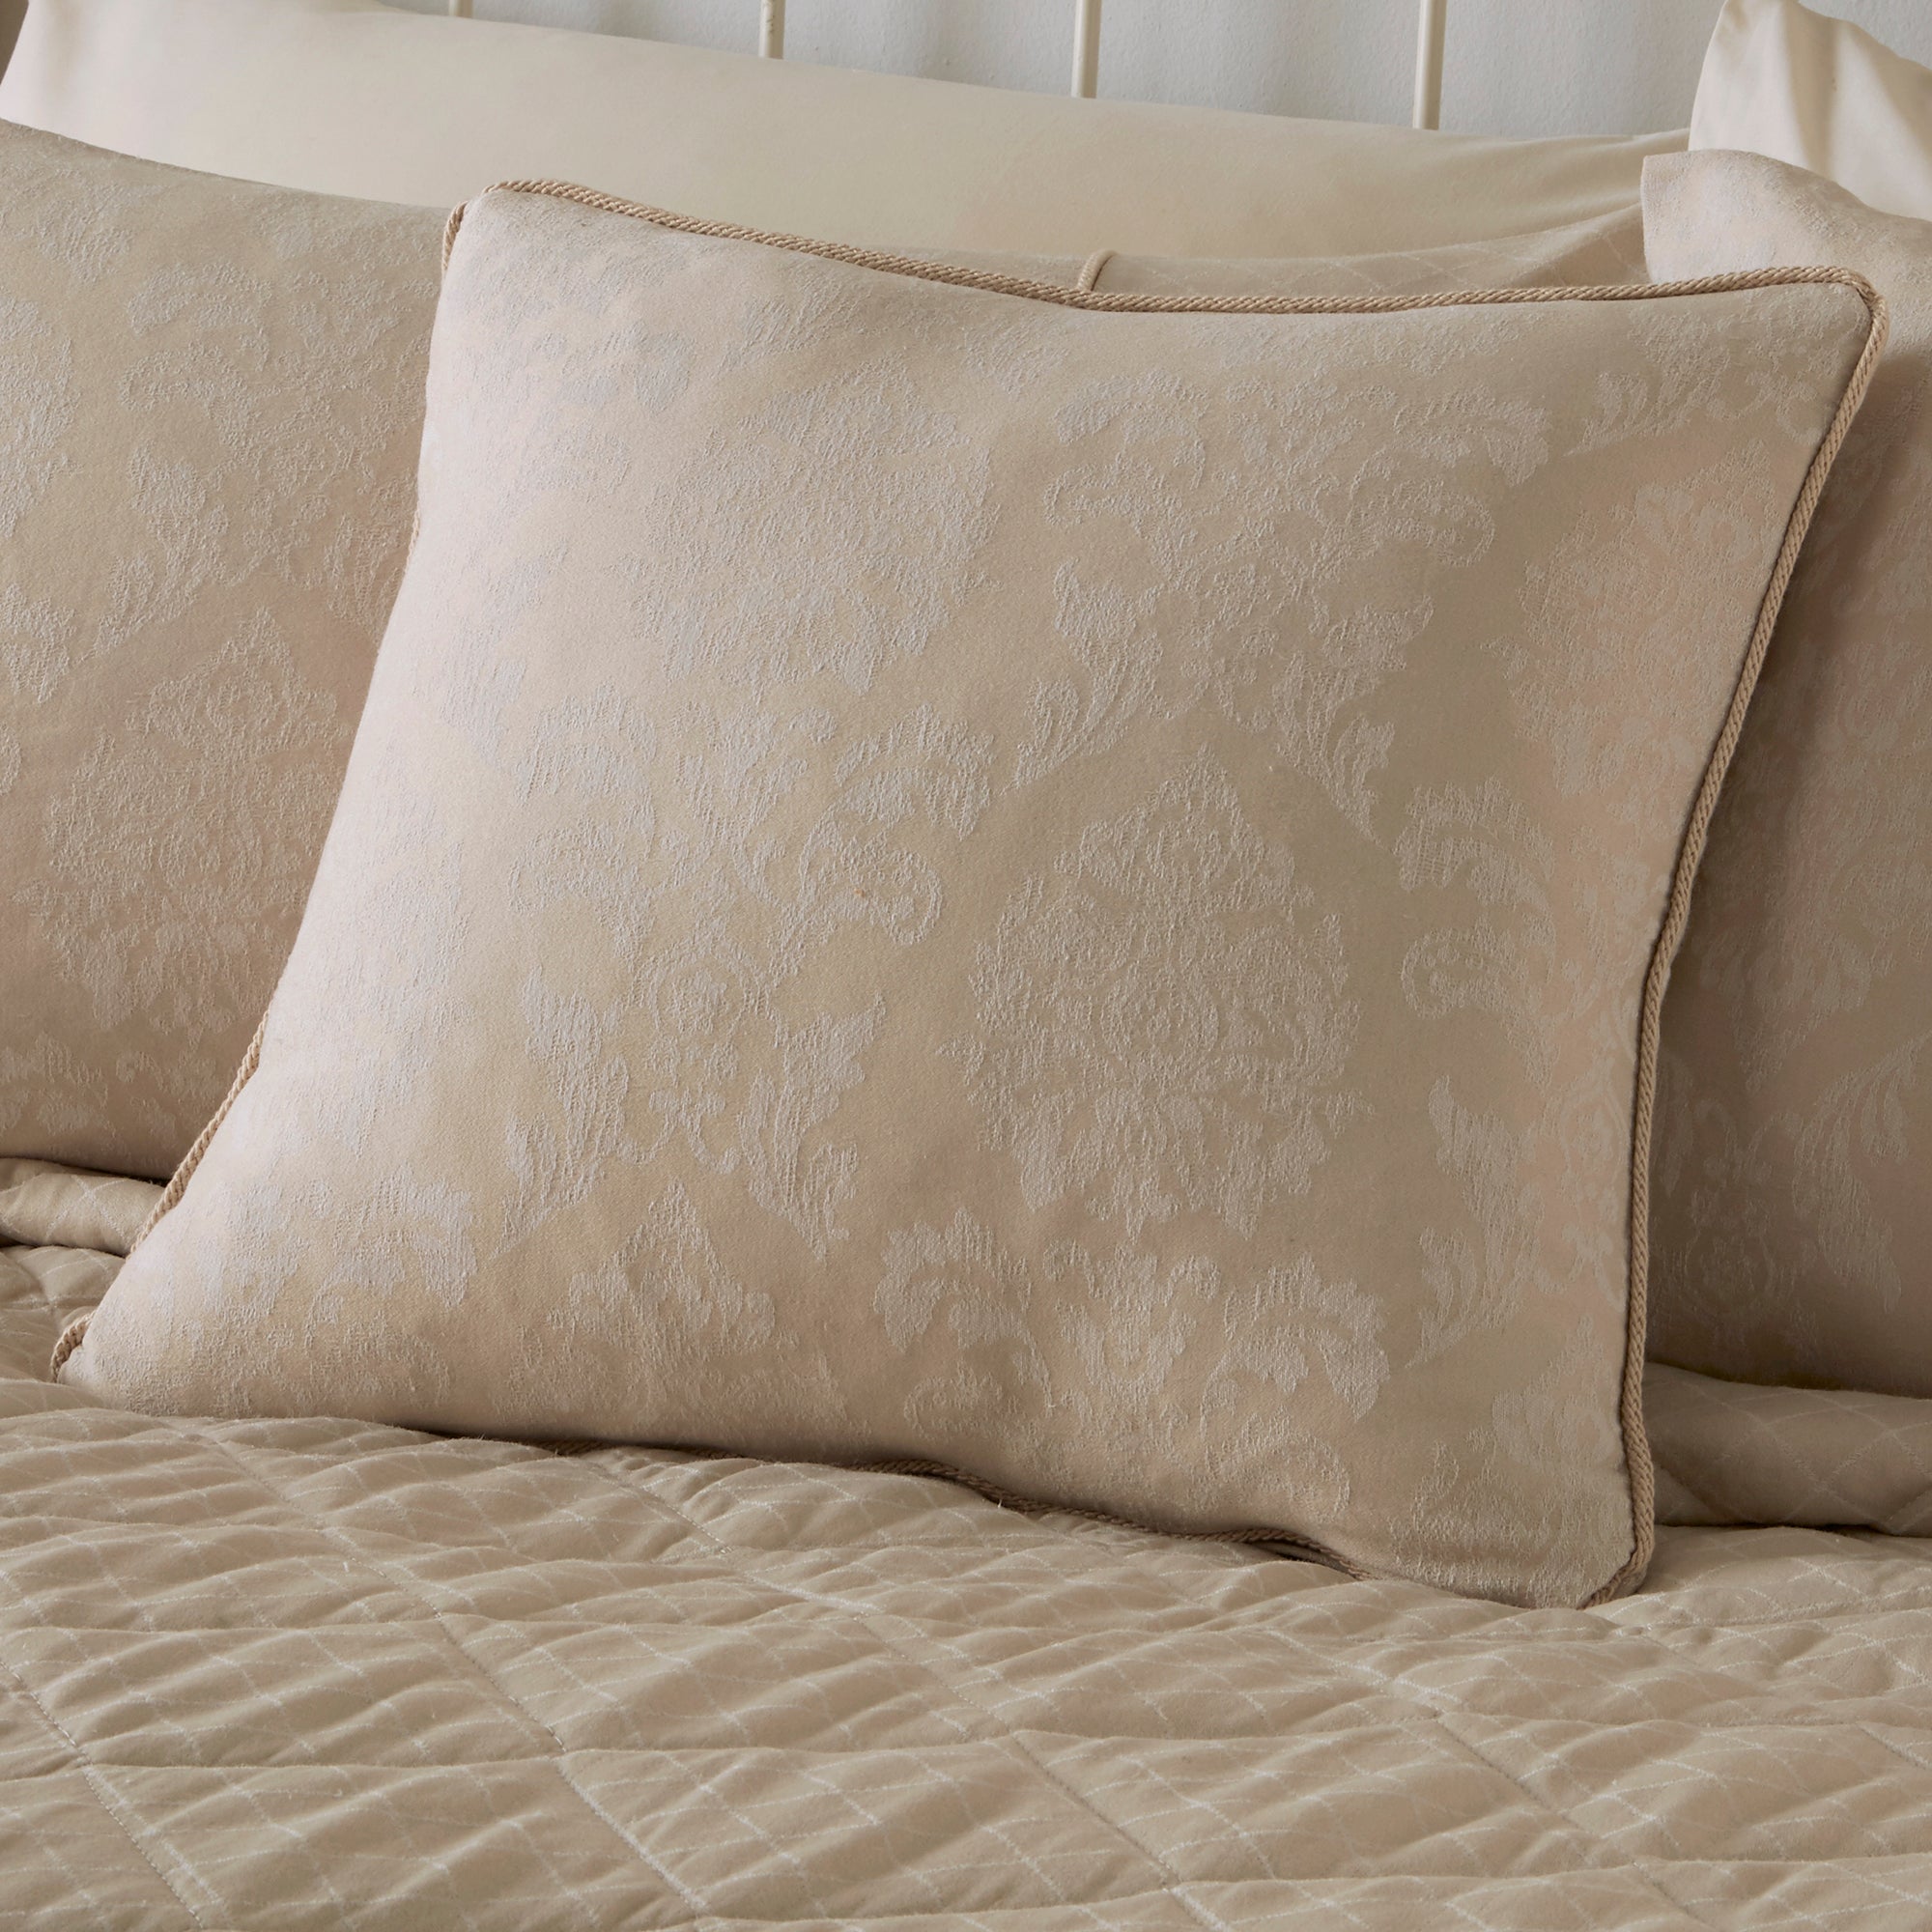 Rosana - Jacquard Duvet Cover Set, Bedspread & Curtains in Soft Gold - by D&D Woven